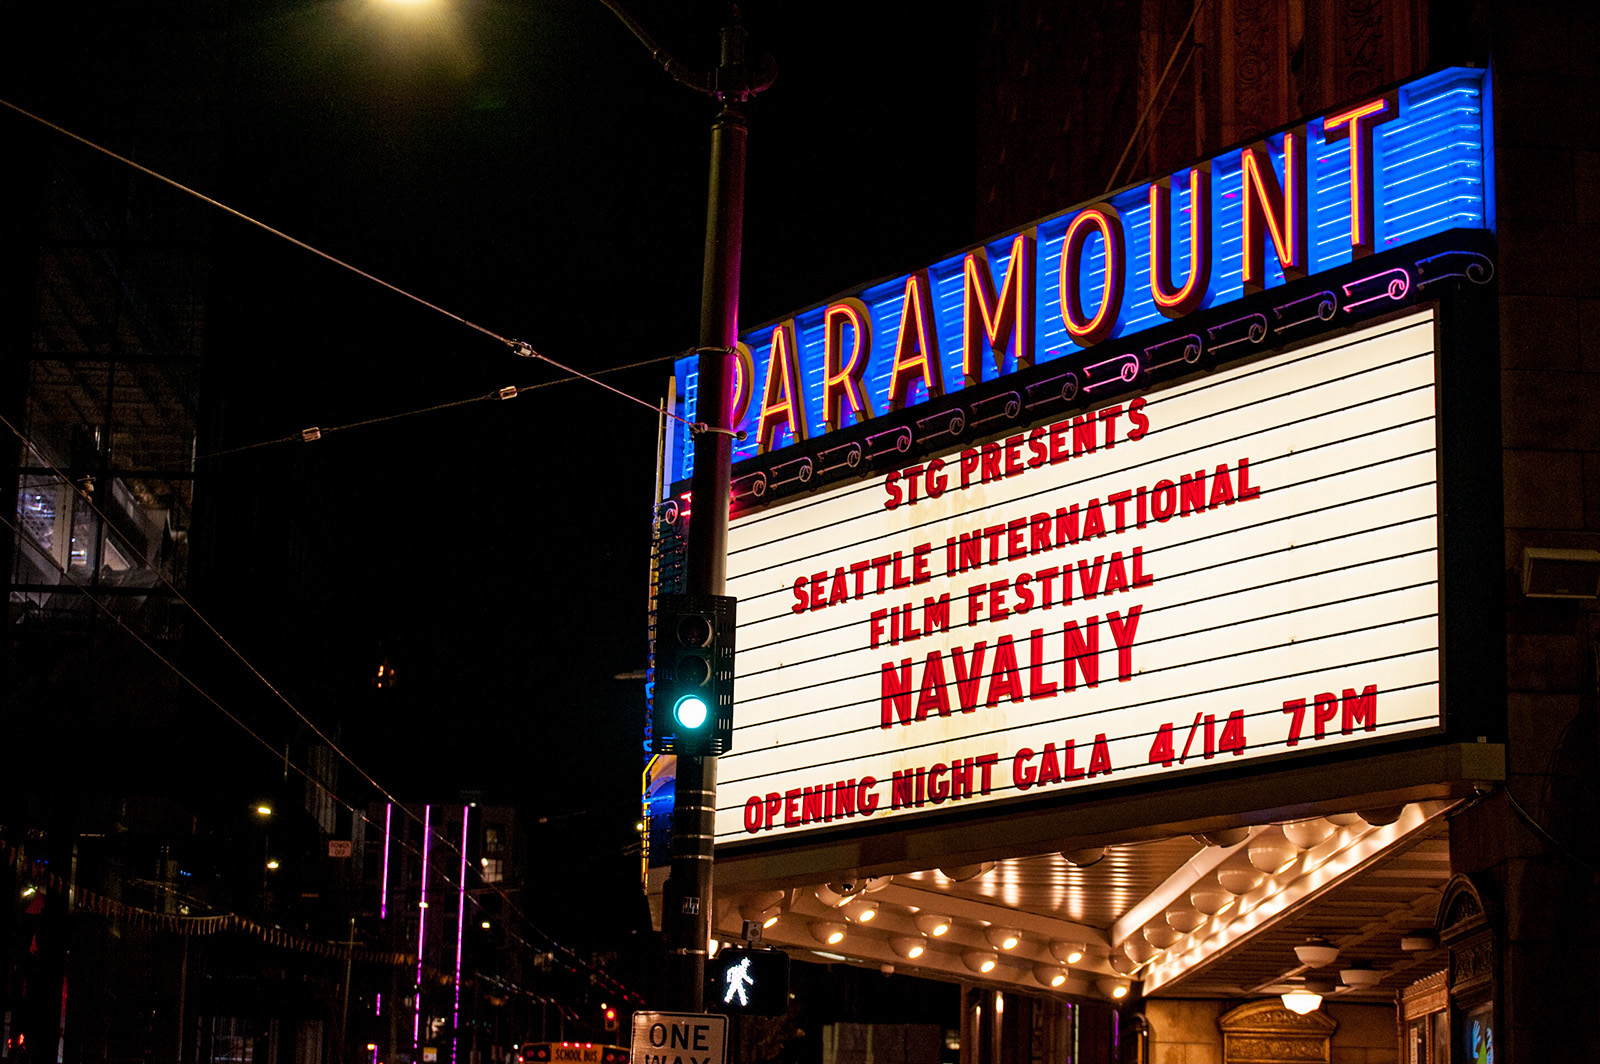 The Paramount marquee announcing Opening Night of the 48th Seattle International Film Festival with the film, Navalny